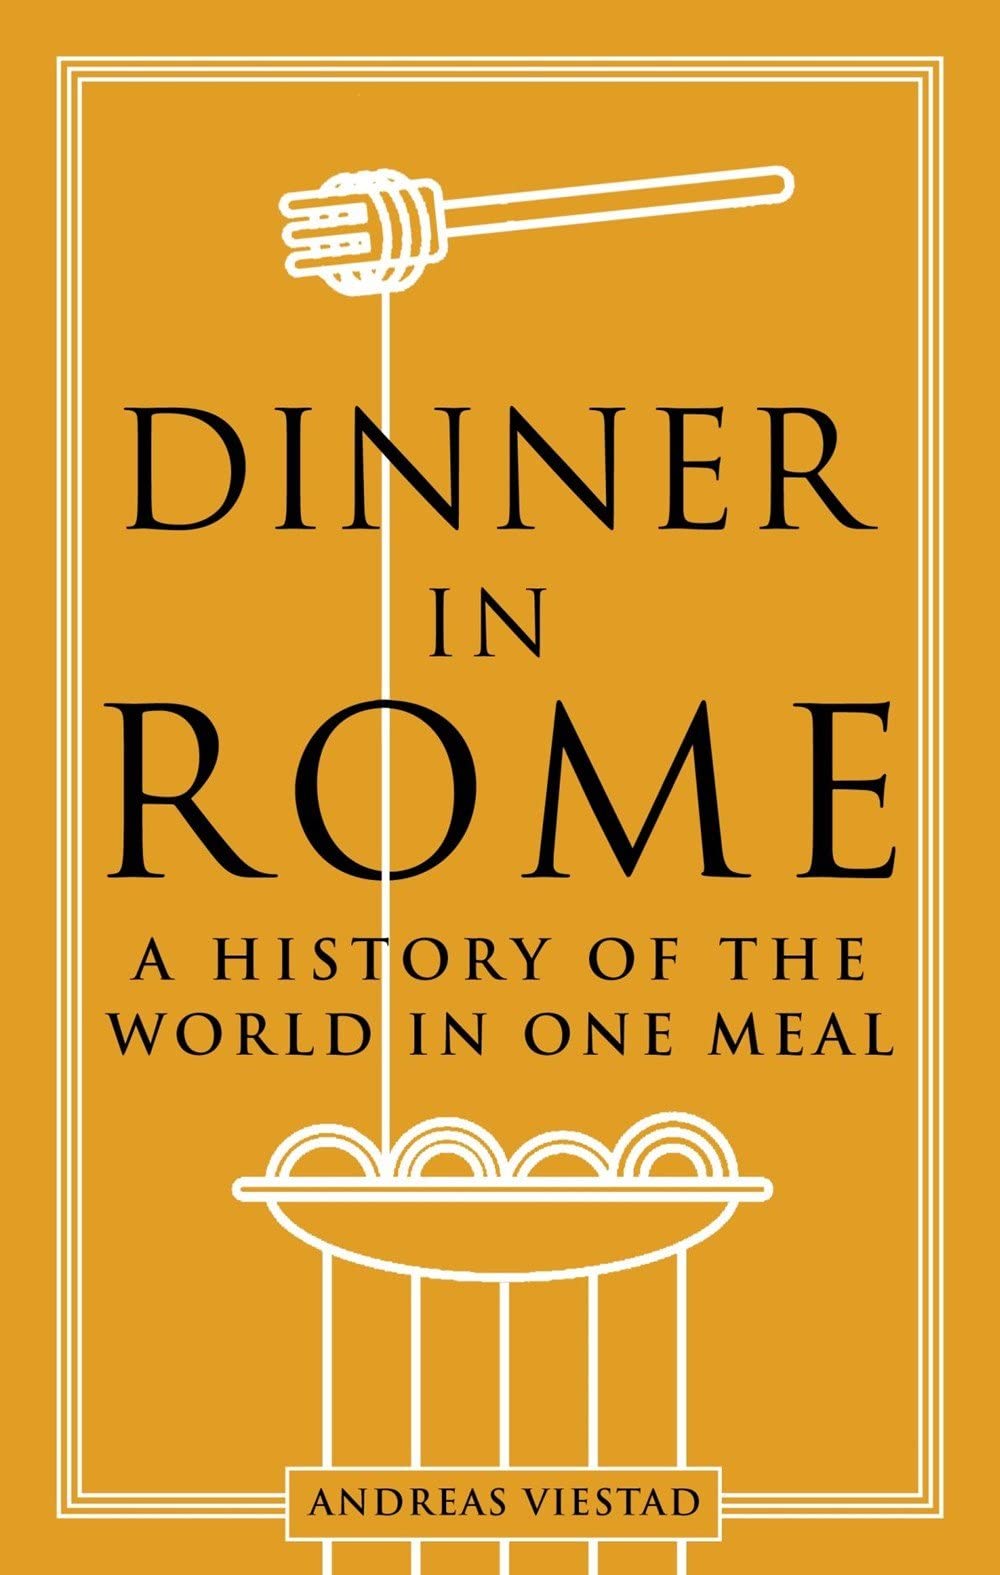 Dinner in Rome: A History of the World in One Meal (Andreas Viestad)